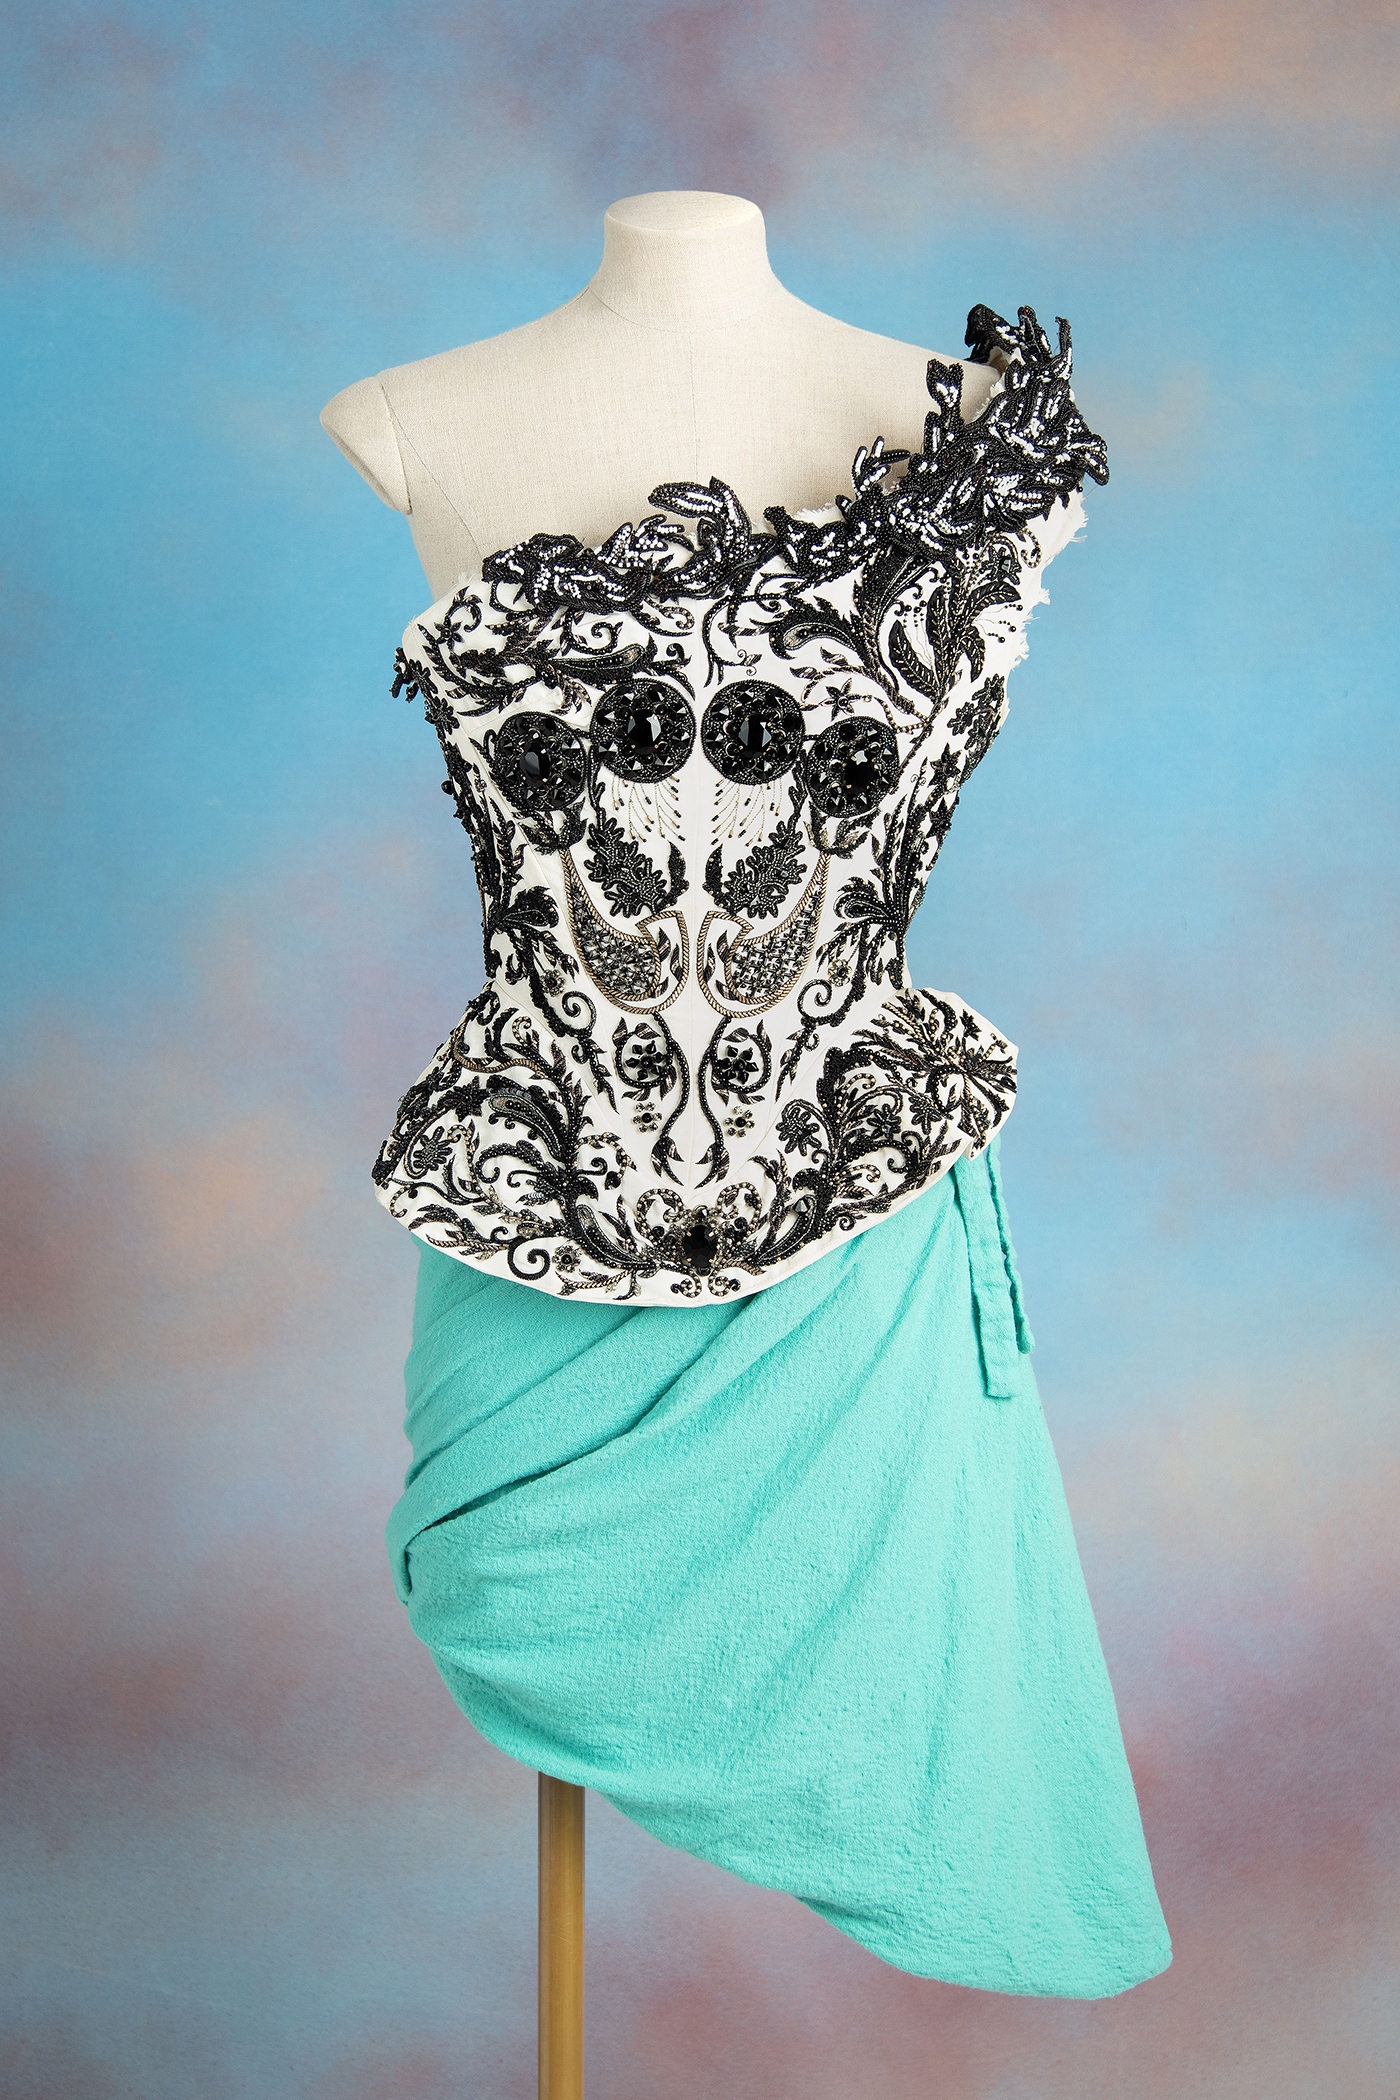 Vivienne Westwood Corsets - From 1987 to Present Day